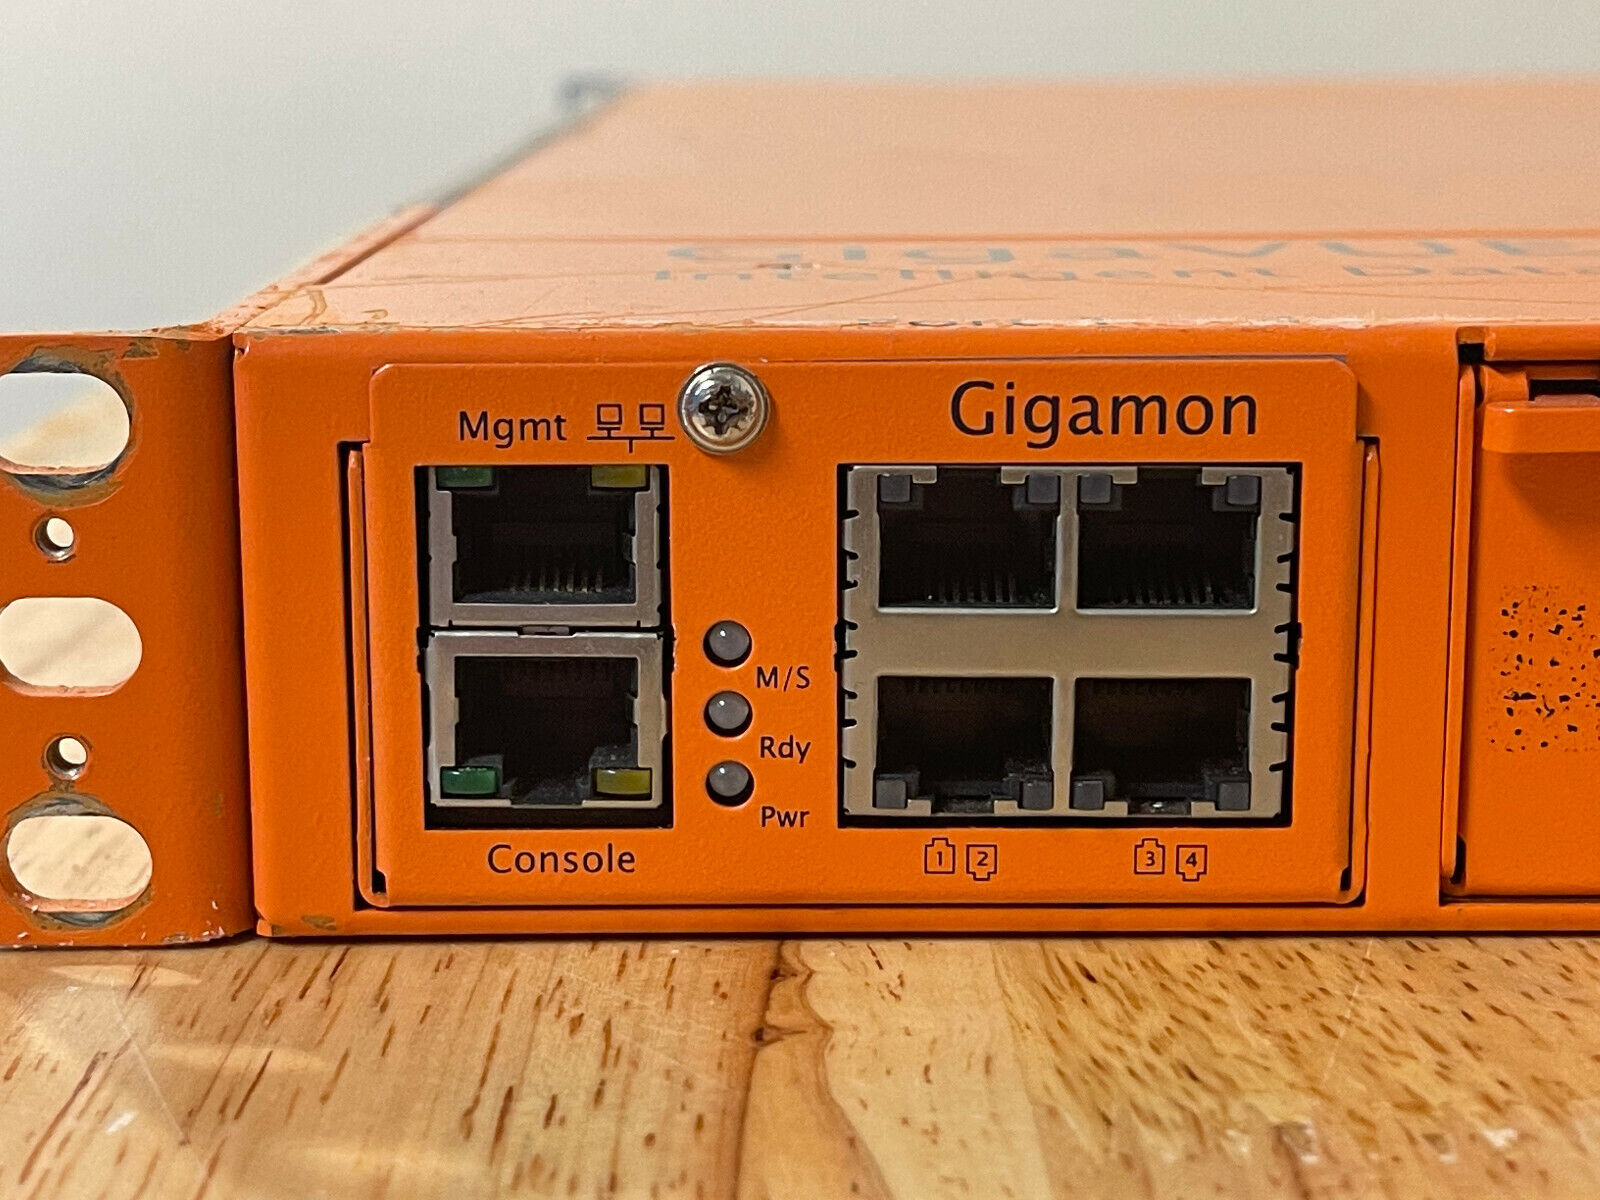 Gigamon GigaVUE-420 CU 1/10G Ethernet Switch Chassis for Network Visibility/Tap.